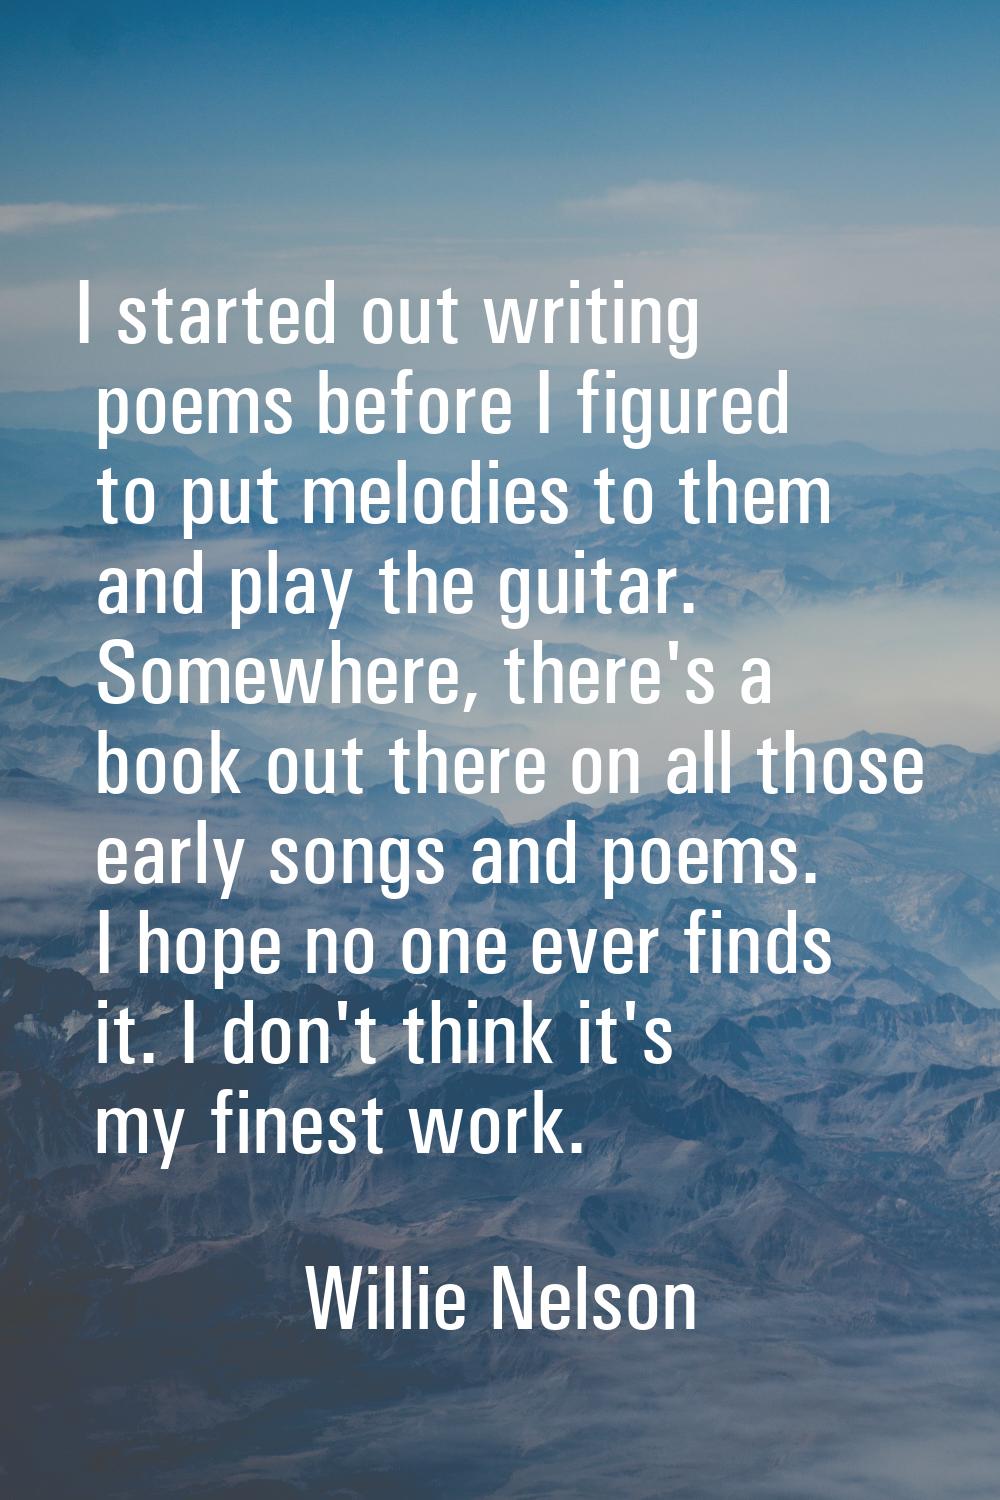 I started out writing poems before I figured to put melodies to them and play the guitar. Somewhere